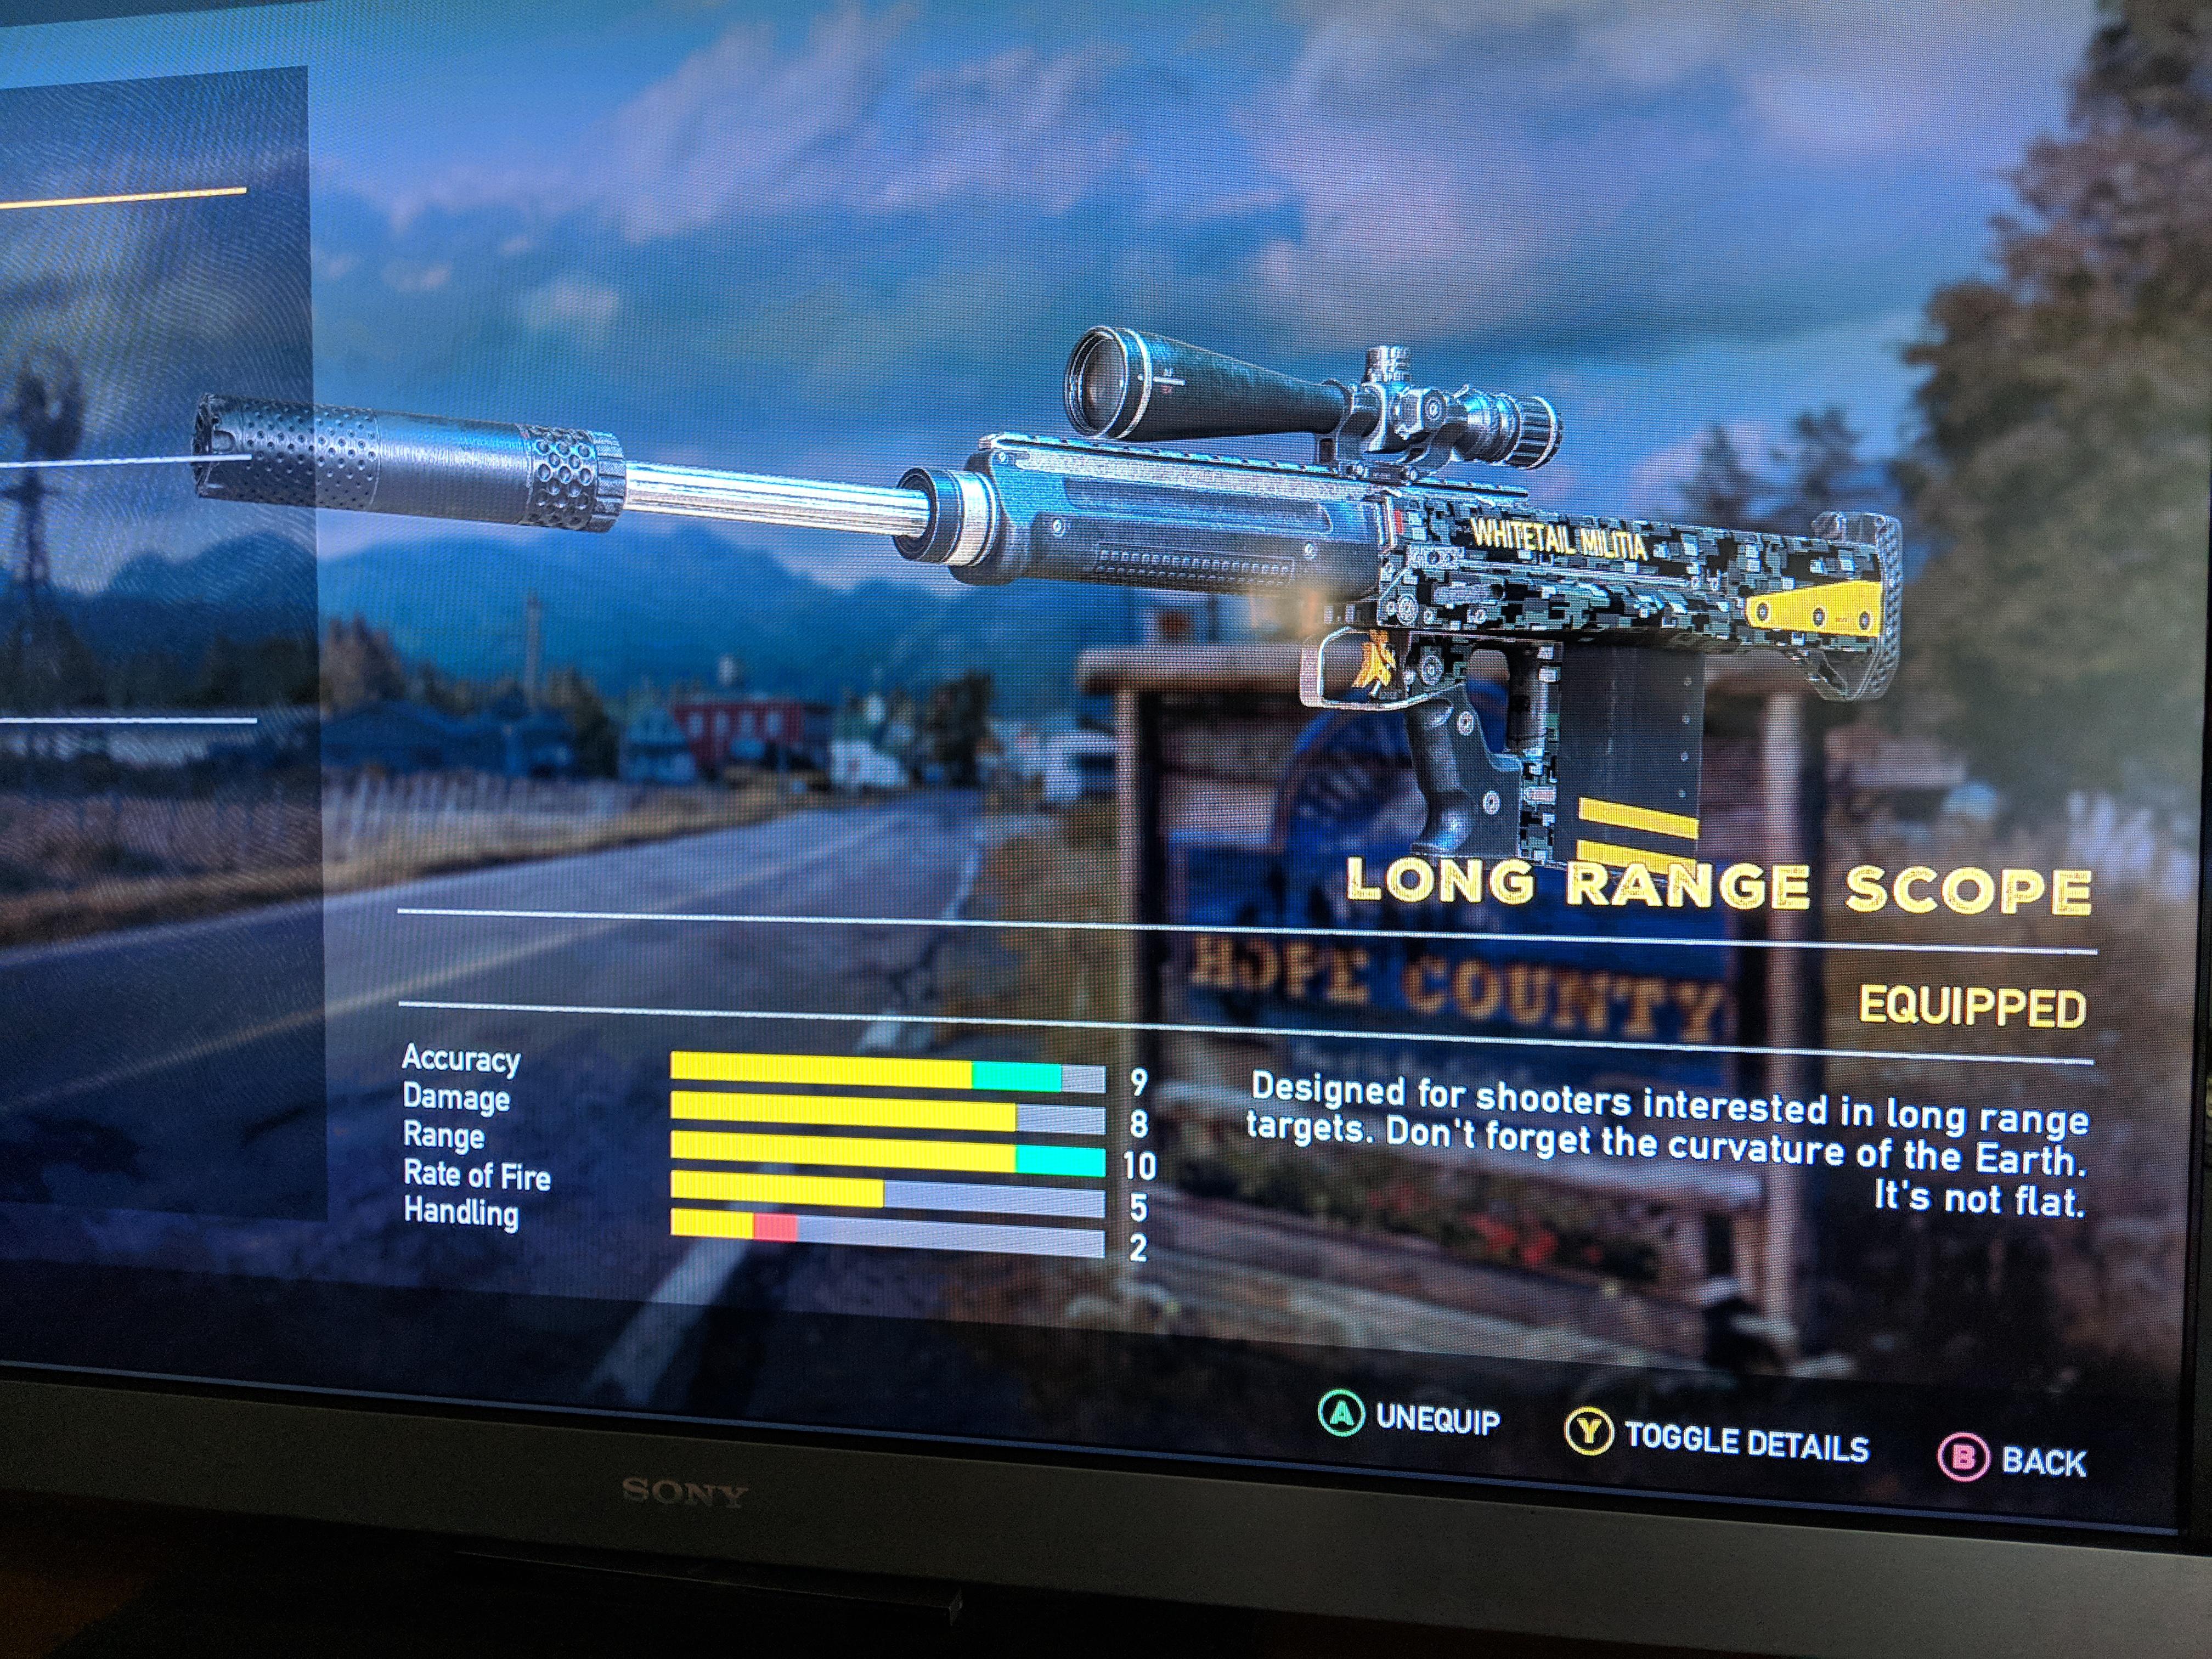 far cry 5 has no chill - Long Range Scope Of COU9 Equipped Accuracy Damage Range Rate of Fire Handing Designed for shooters interested in long range targets. Don't forget the curvature of the Earth. It's not flat. Unequip Toggle Details Back